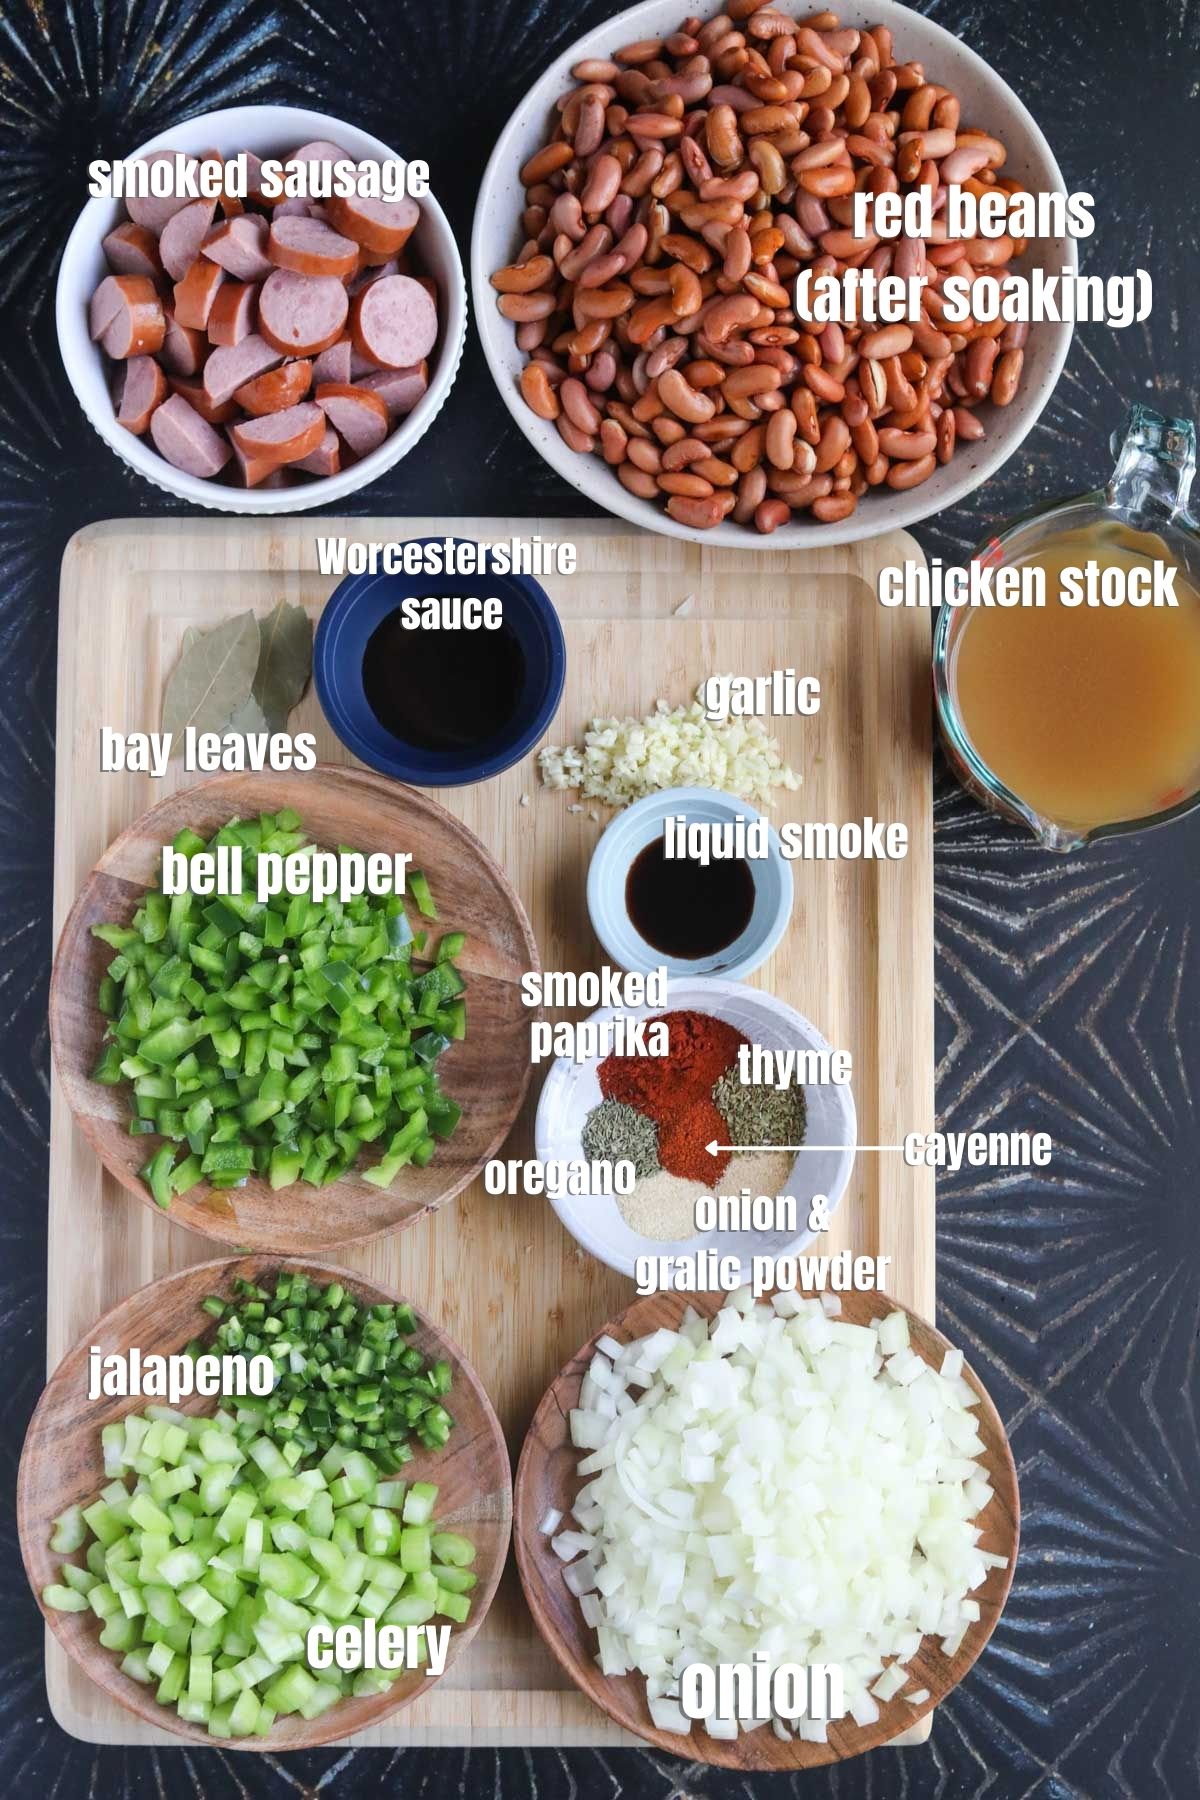 Ingredients for making Louisiana red beans and rice spread out on a black surface.